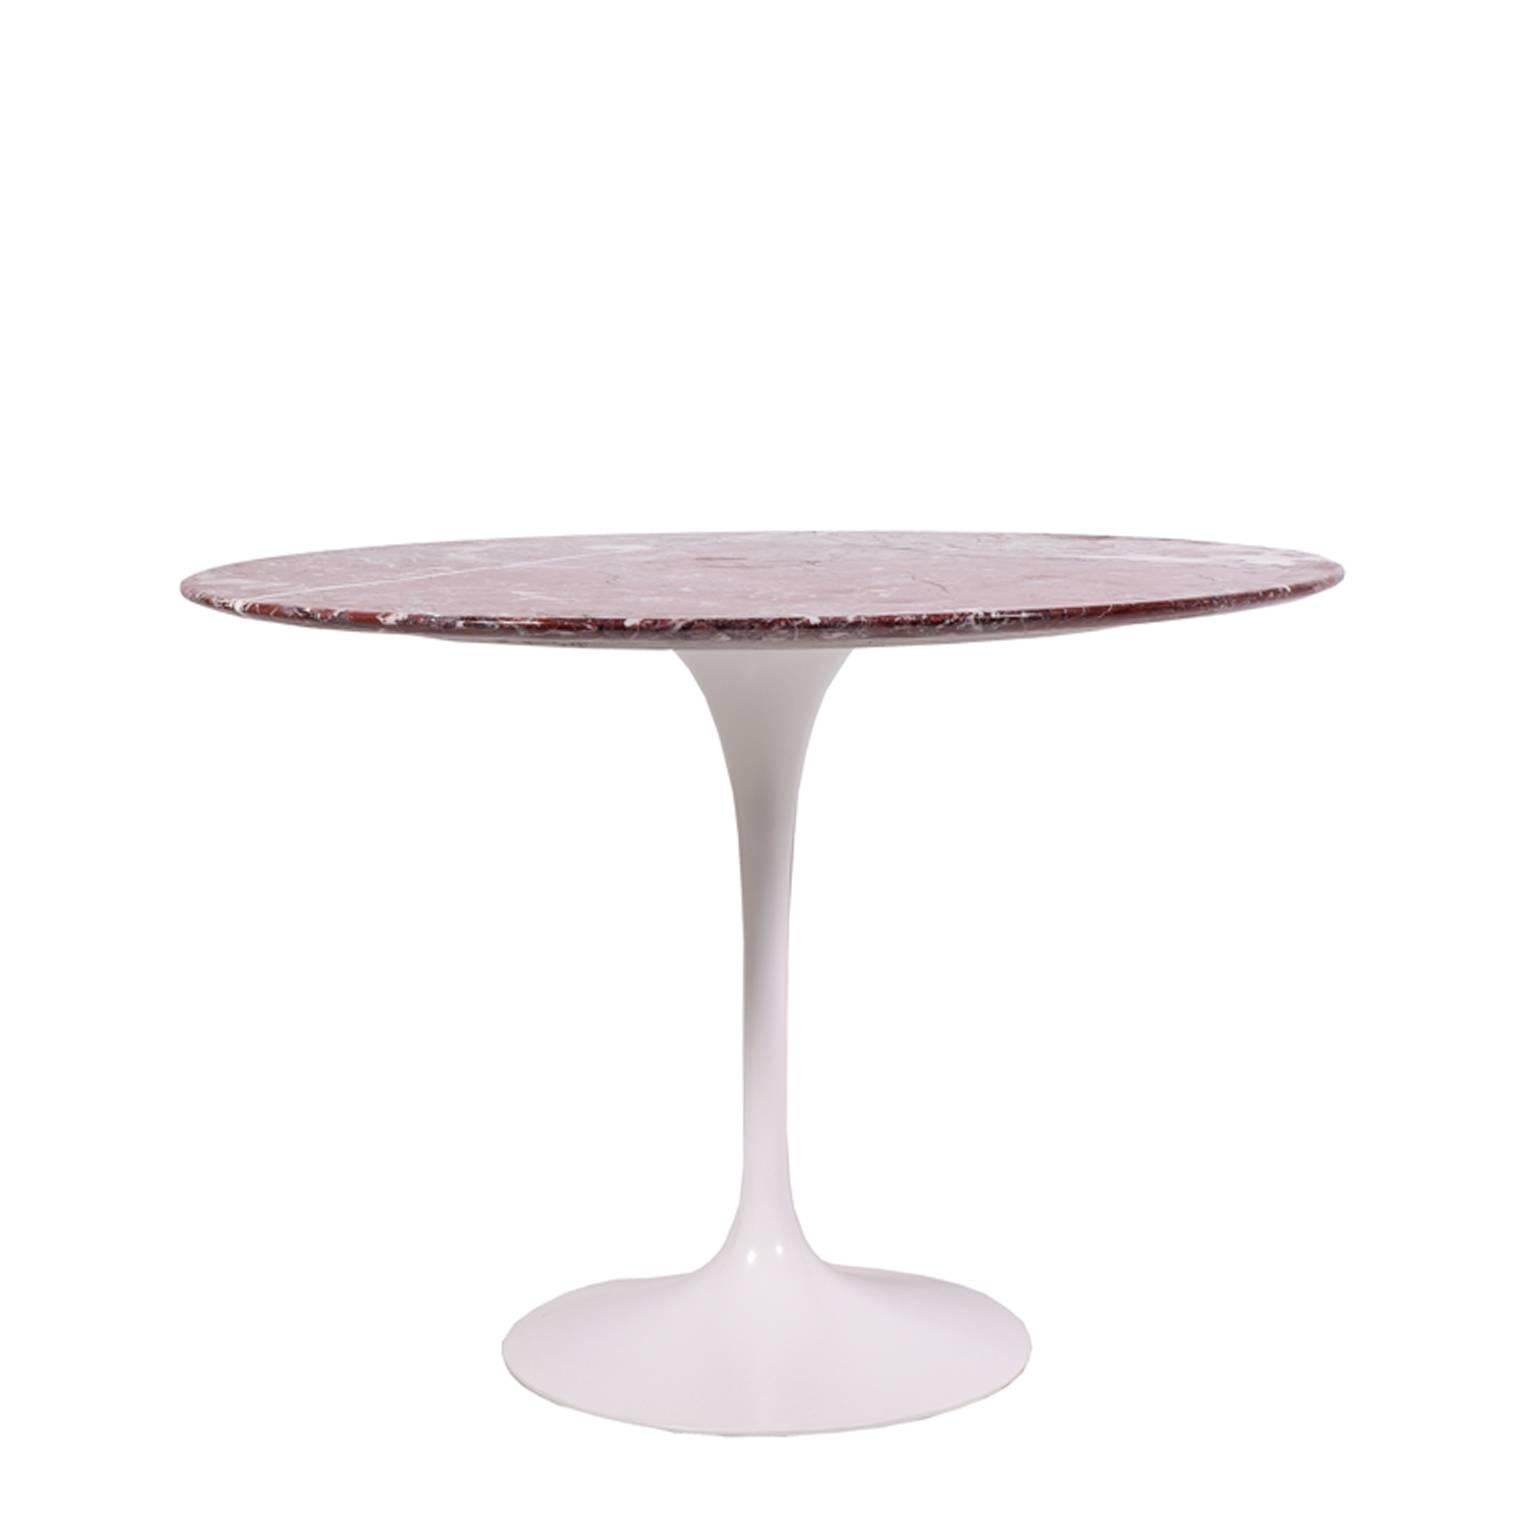 Round Rosso Italian marble-top, white vein on white painted cast metal pedestal base. Made by Knoll International.